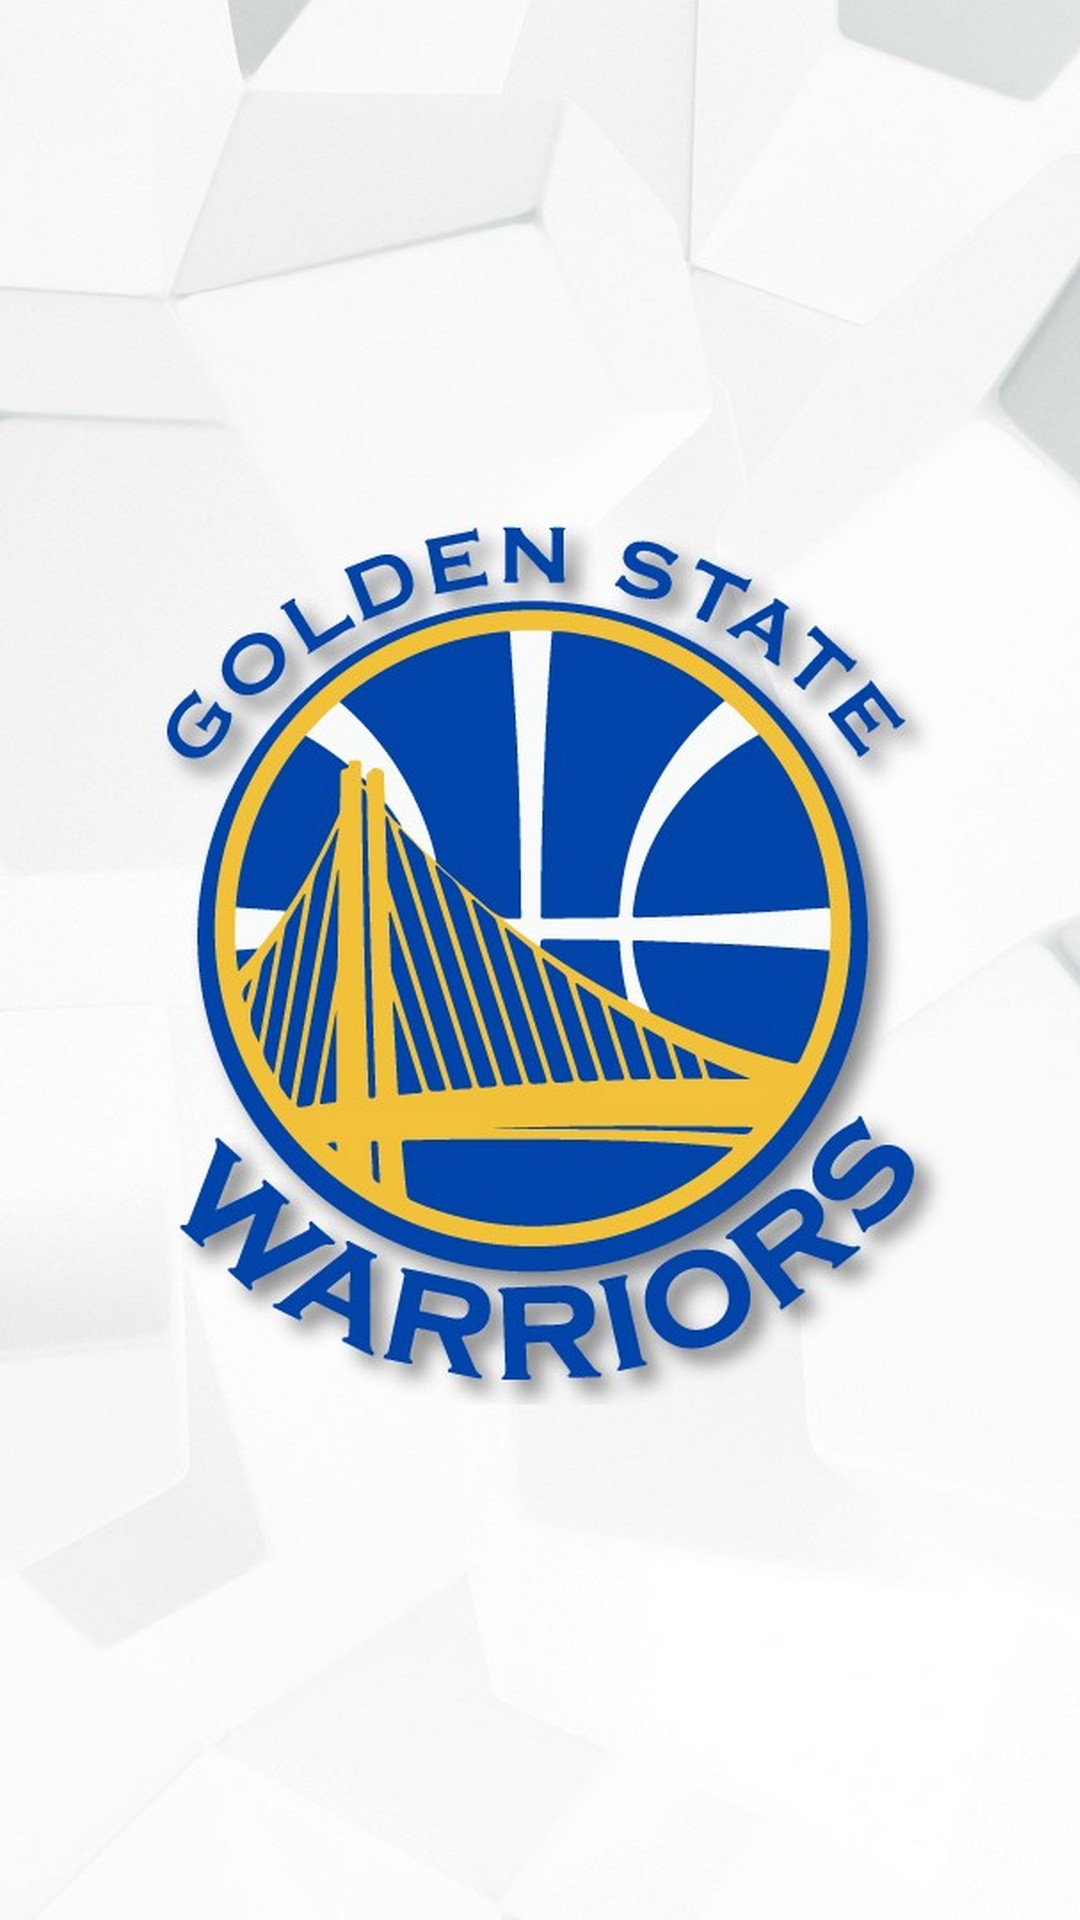 Golden State iPhone 7 Wallpaper with image dimensions 1080X1920 pixel. You can make this wallpaper for your Desktop Computer Backgrounds, Windows or Mac Screensavers, iPhone Lock screen, Tablet or Android and another Mobile Phone device